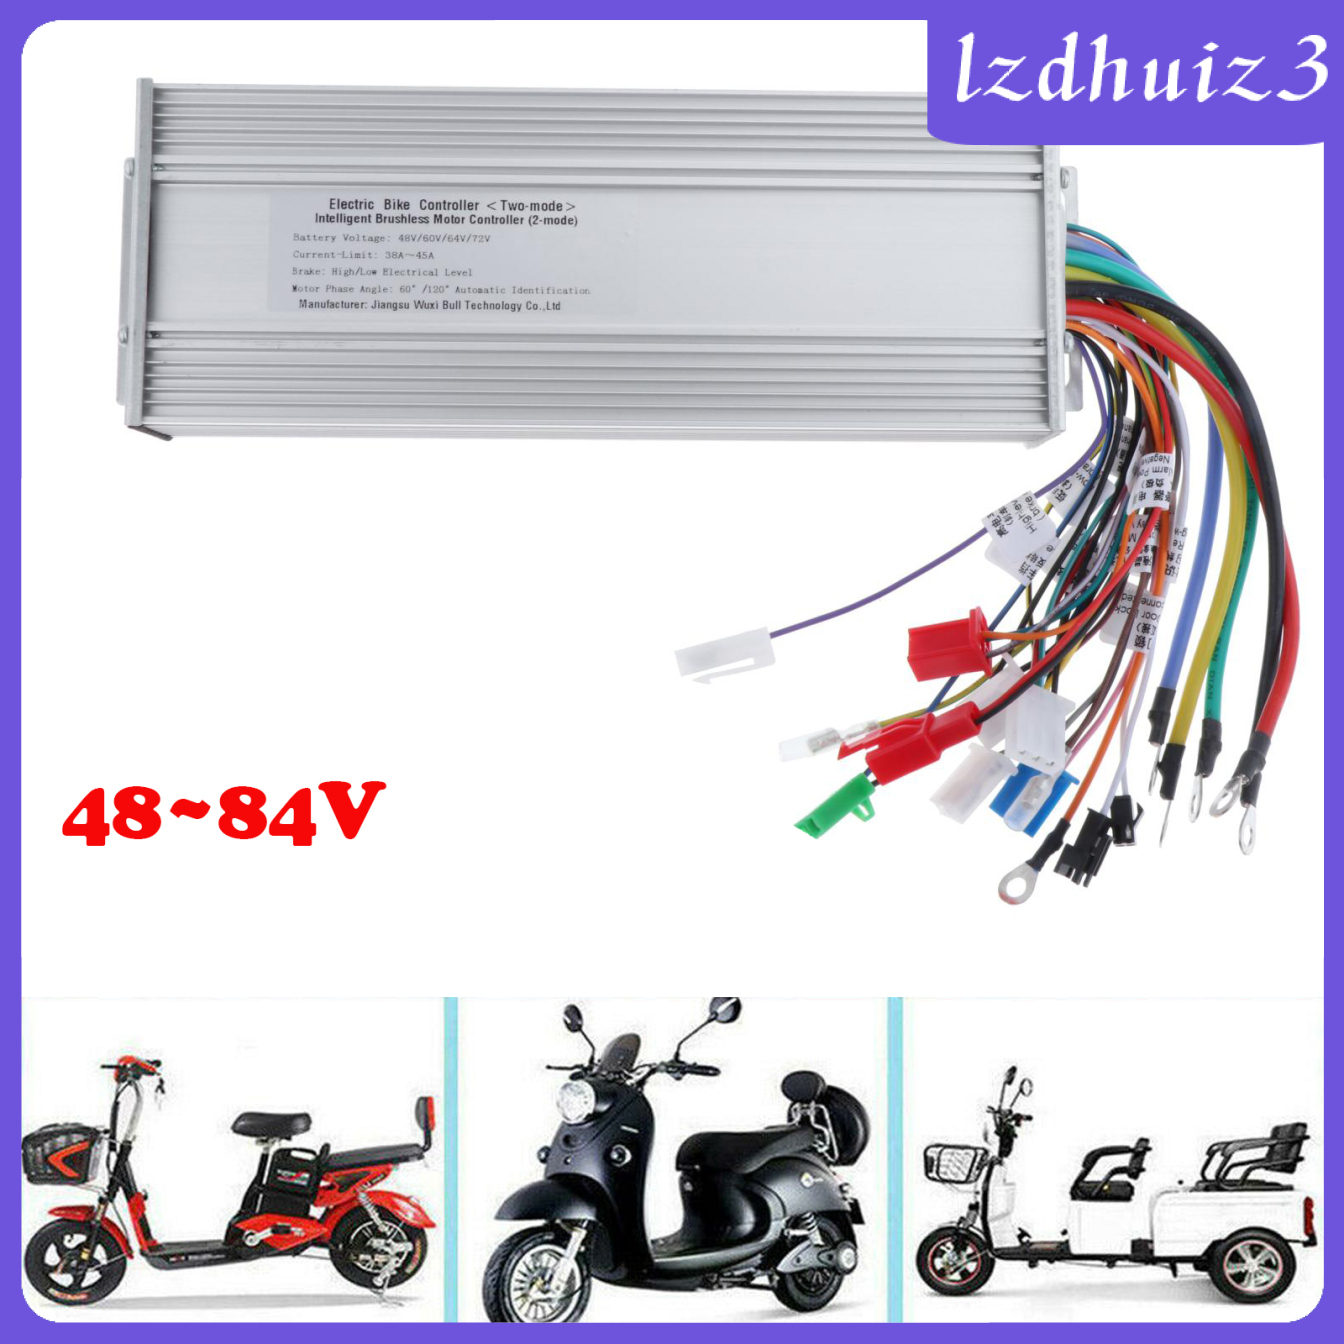 Gemgem Loey Alloy Brushless Controller, 48V 72V E-Bike Electric Cycle Scooter Motor Speed Controller, Electronic Bicycle Skateboard Refit Control Unit